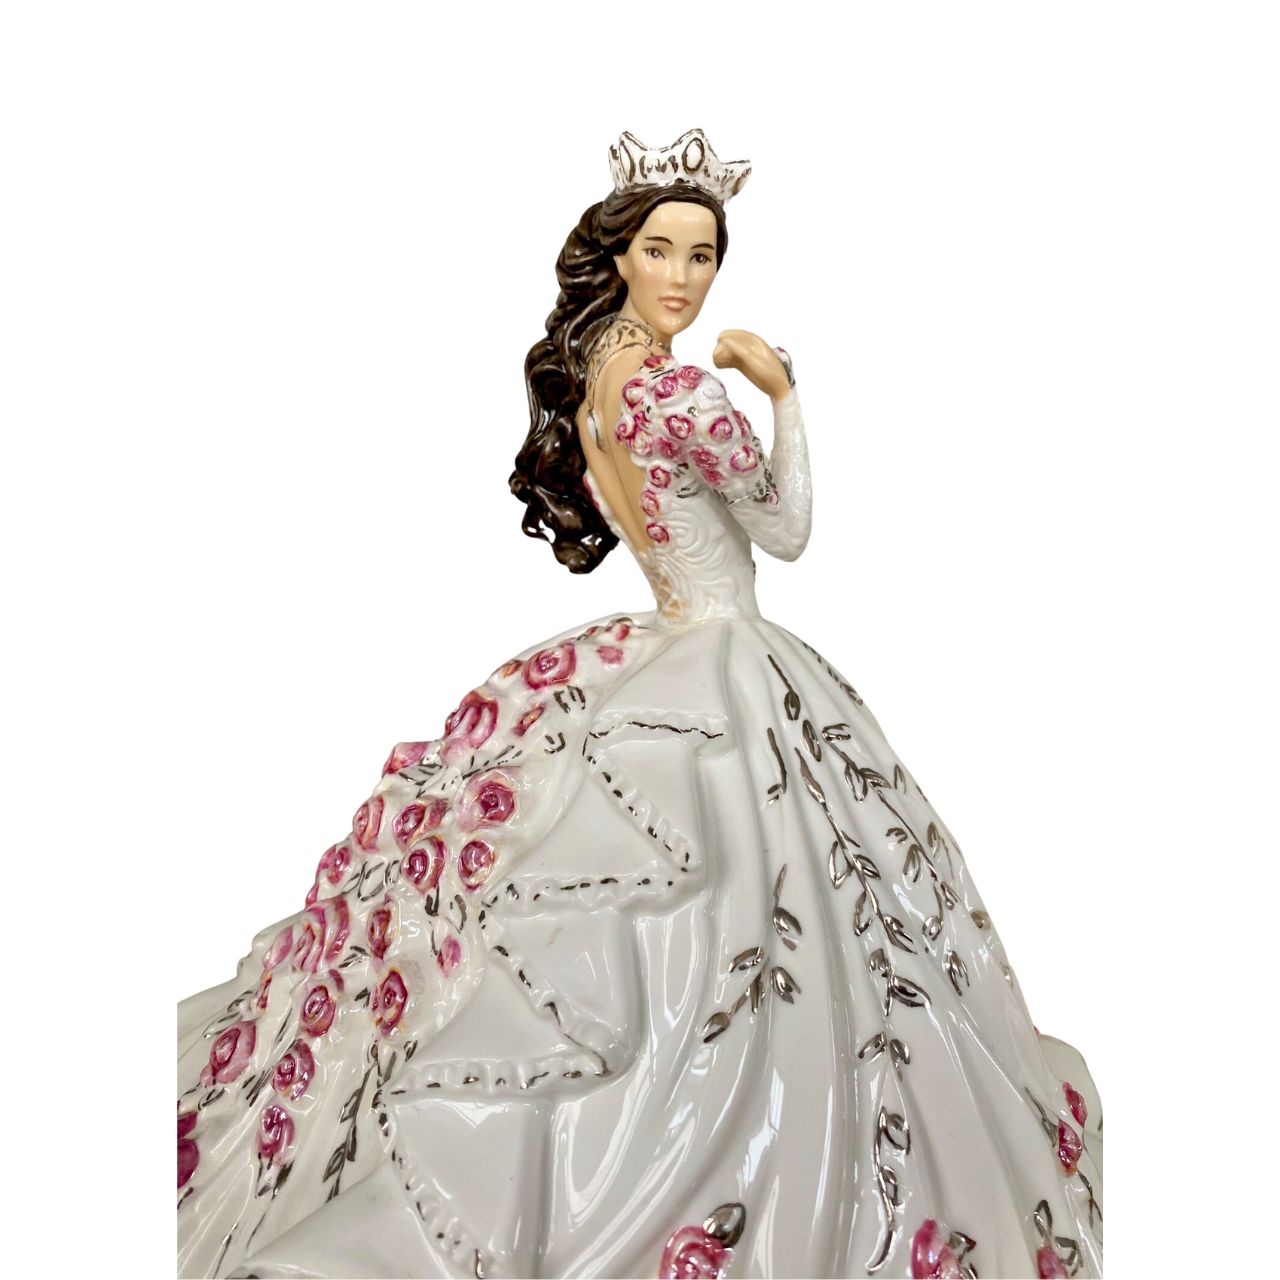 English Ladies Company Gypsy Rose Brunette  Thelma Madine’s stunning gown is recreated in this elegant bone china figurine.  Floral details spill down the back of the dress and across the shoulders; with real platinum highlights adding the finishing touches.